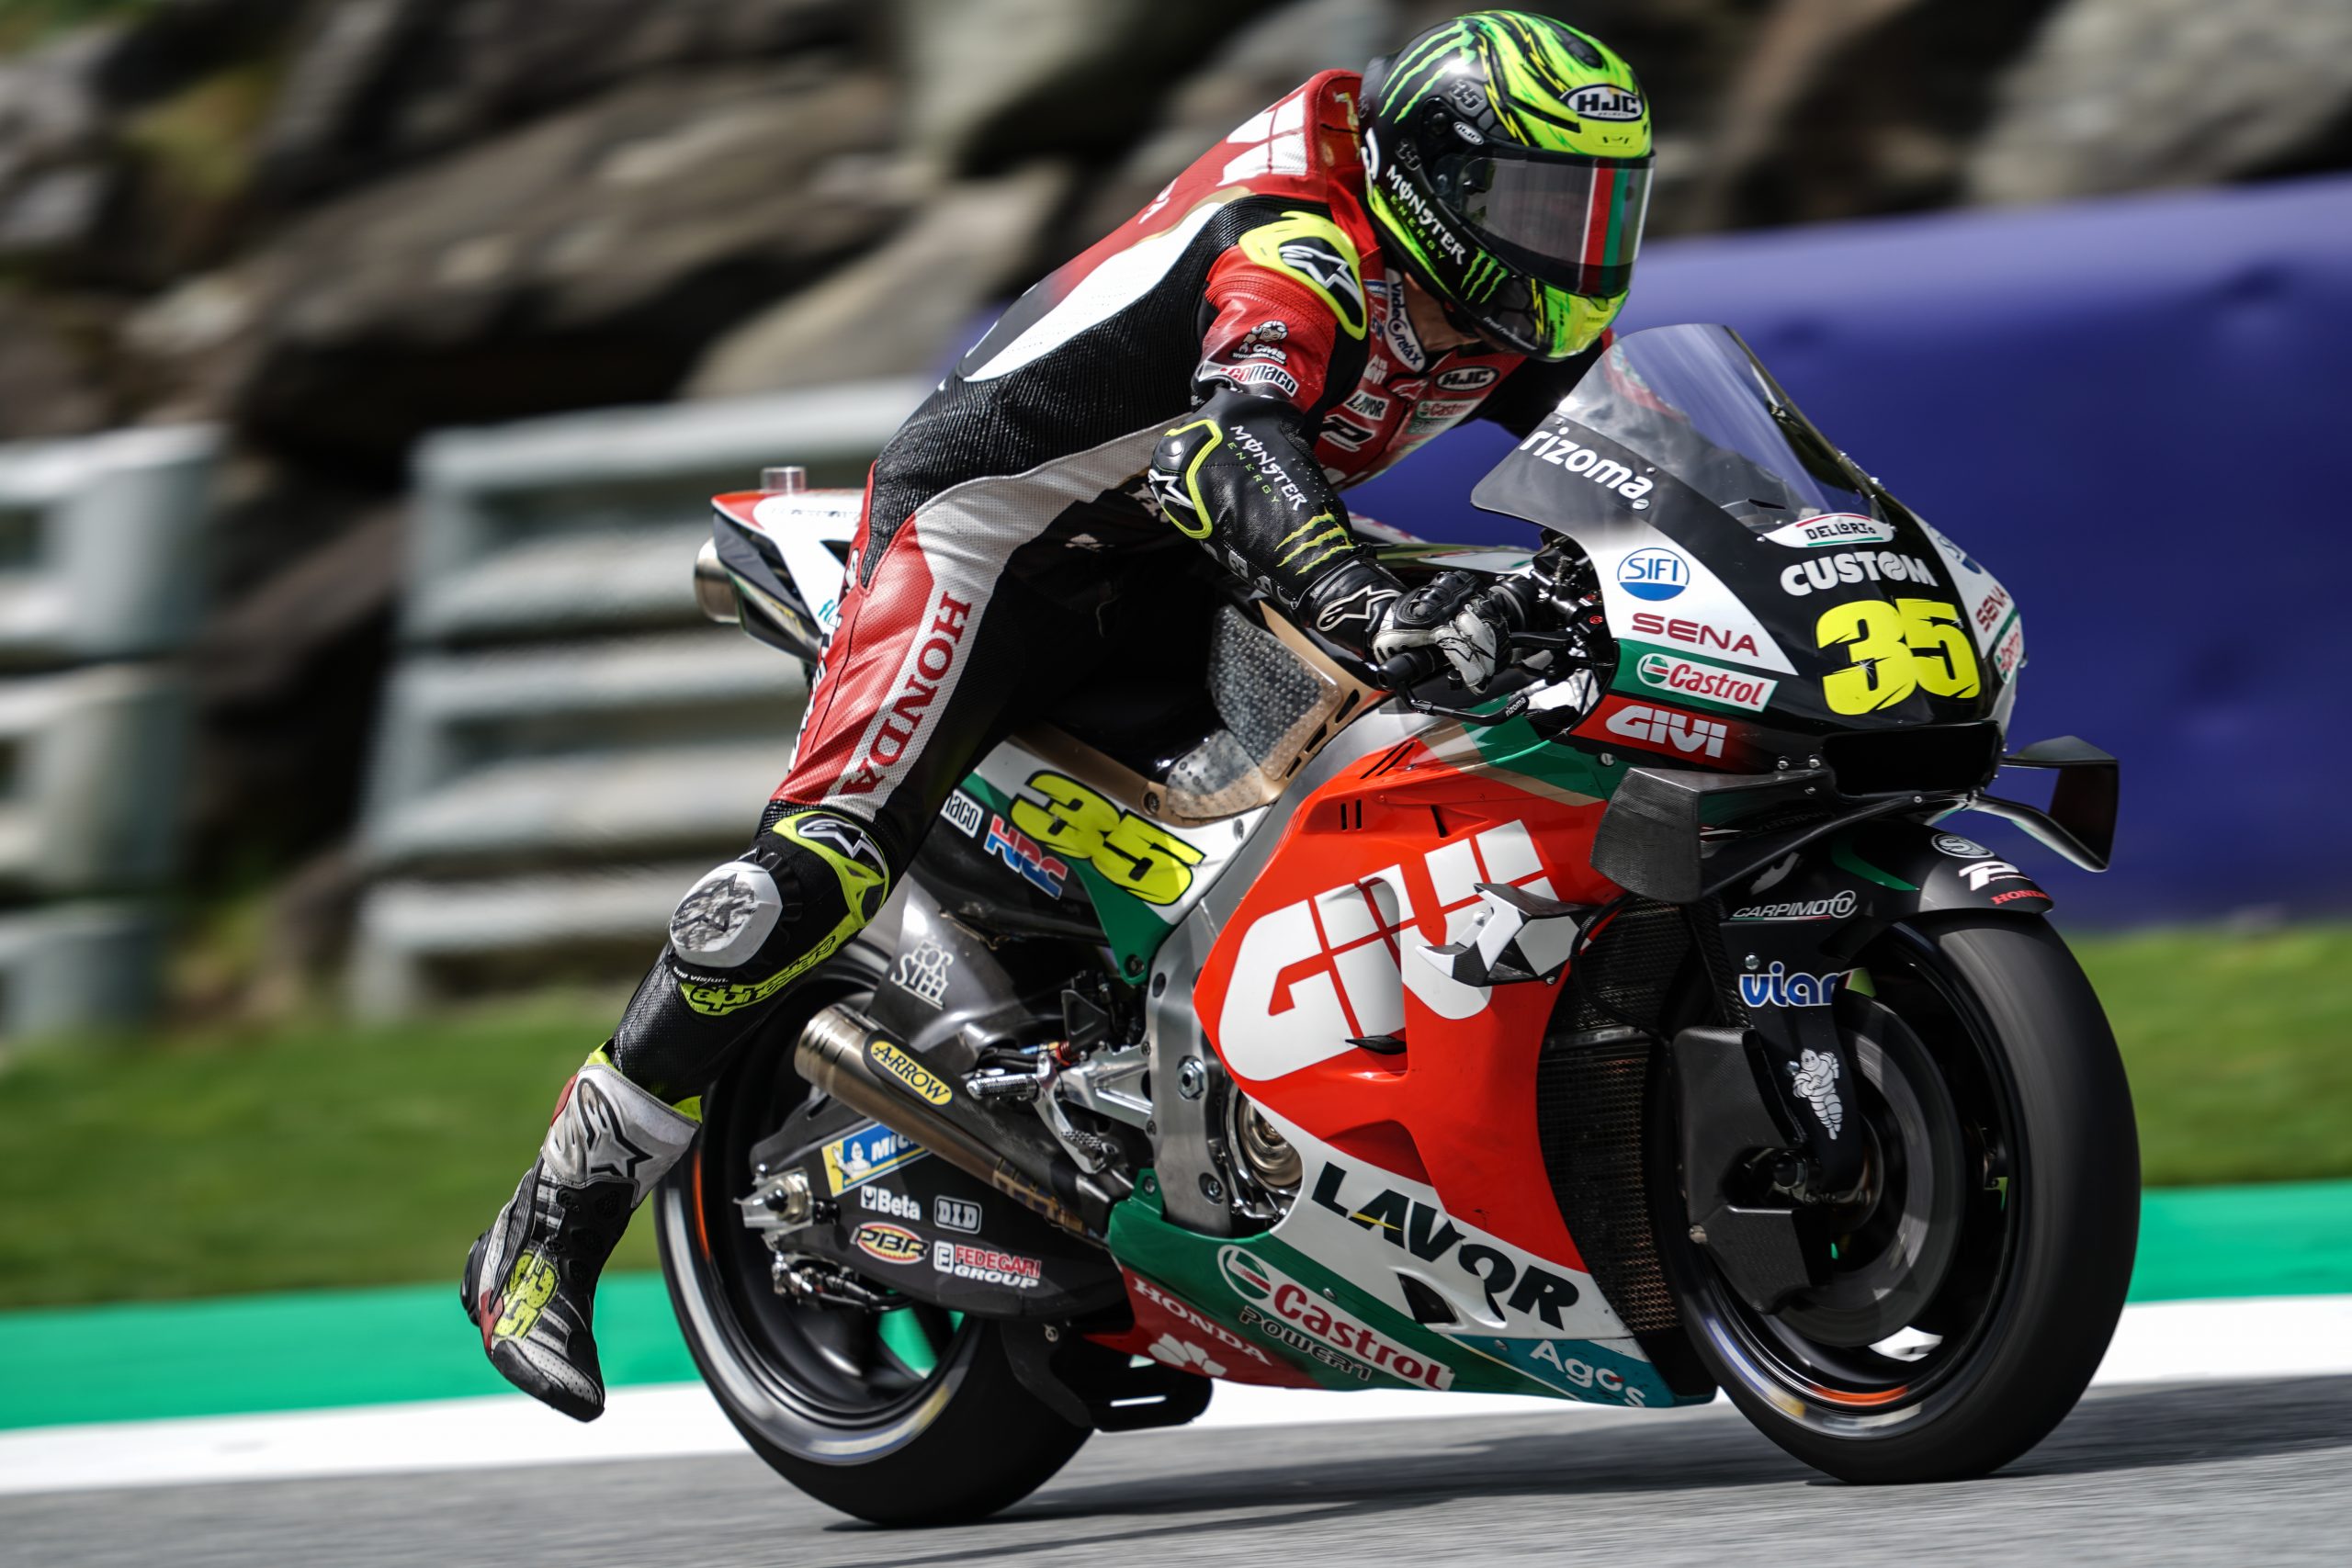 Crutchlow on the 5th row in Spielberg